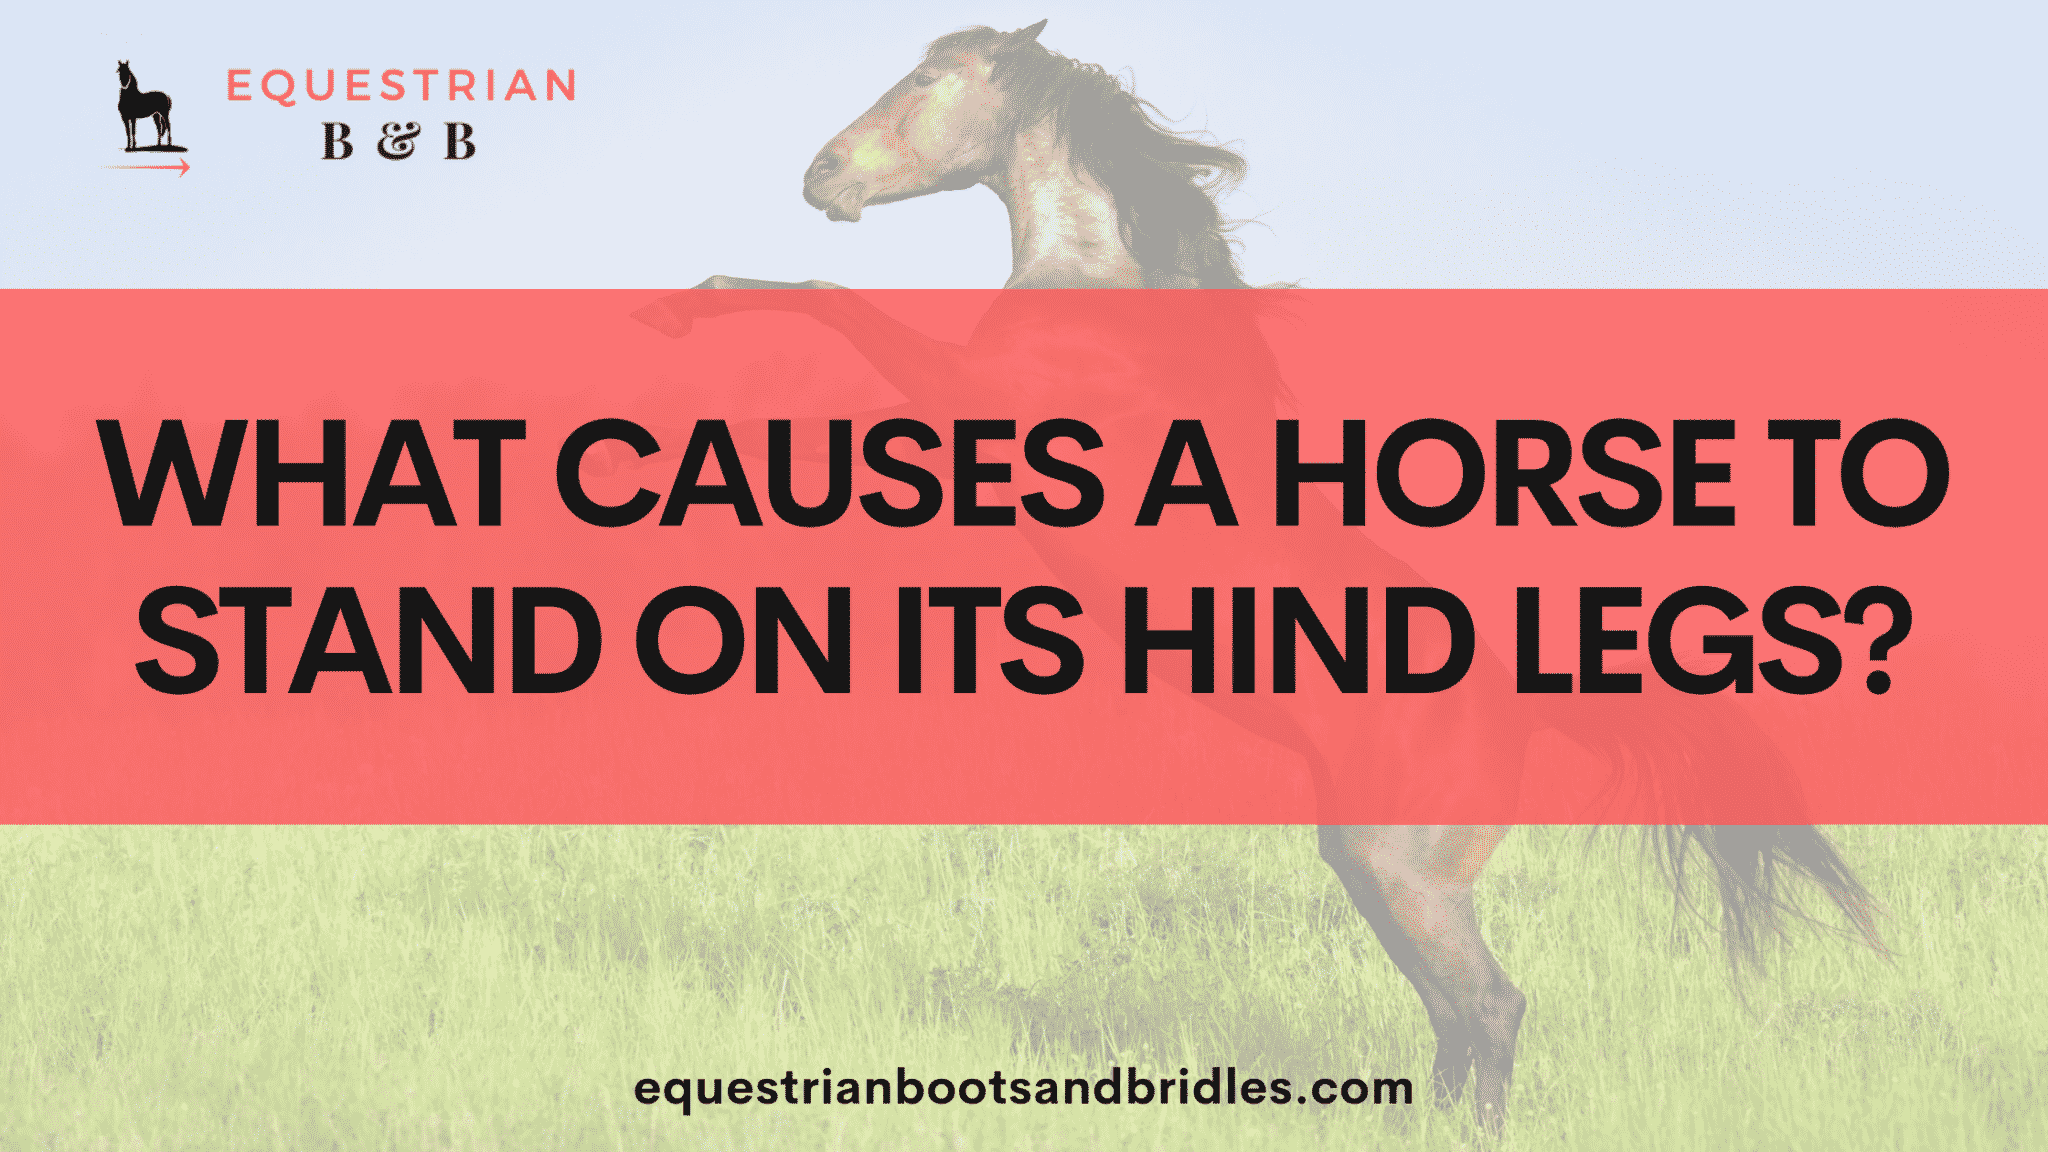 Reasons A Horse May Stand On Its Hind Legs